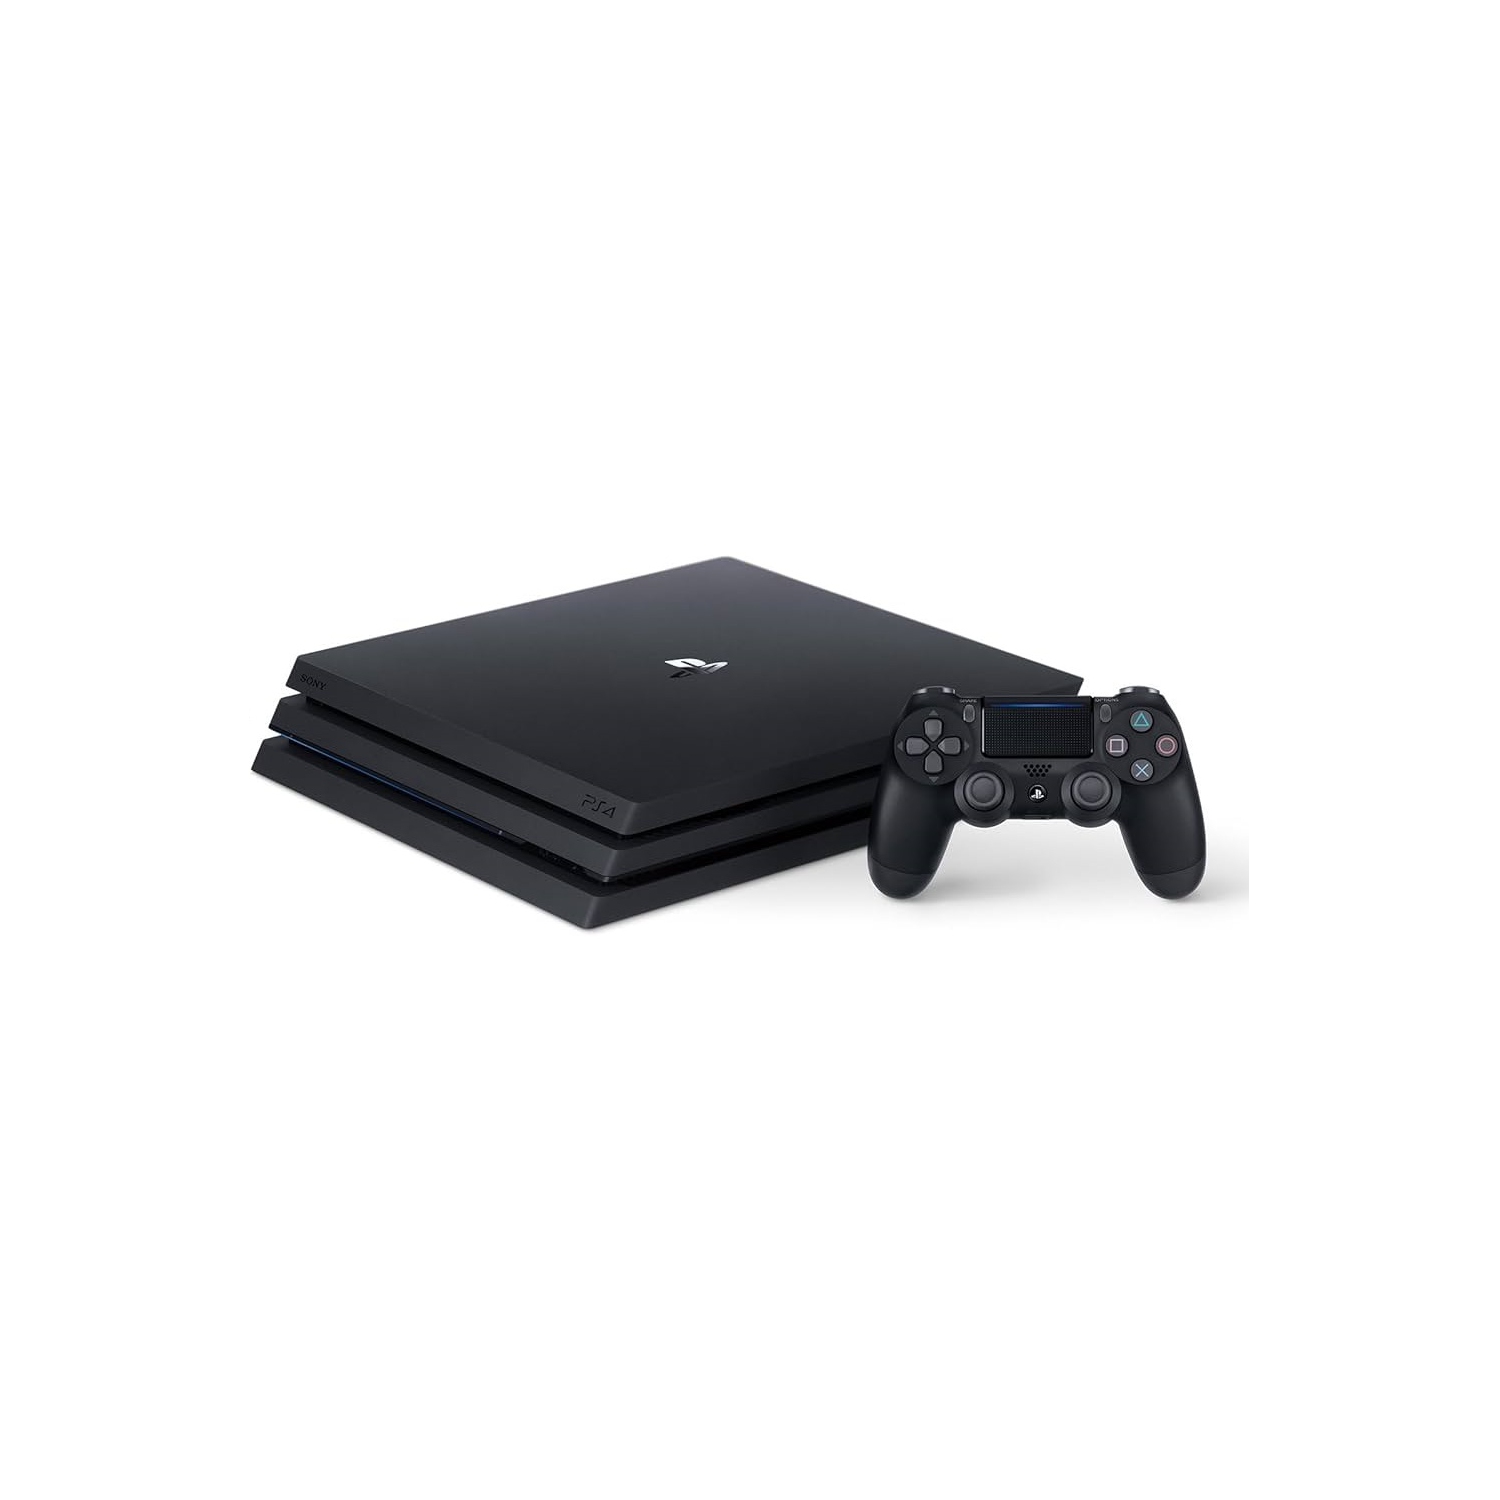 Refurbished (Good) - Sony PlayStation 4 PS4 Pro 1TB Console (Jet Black)